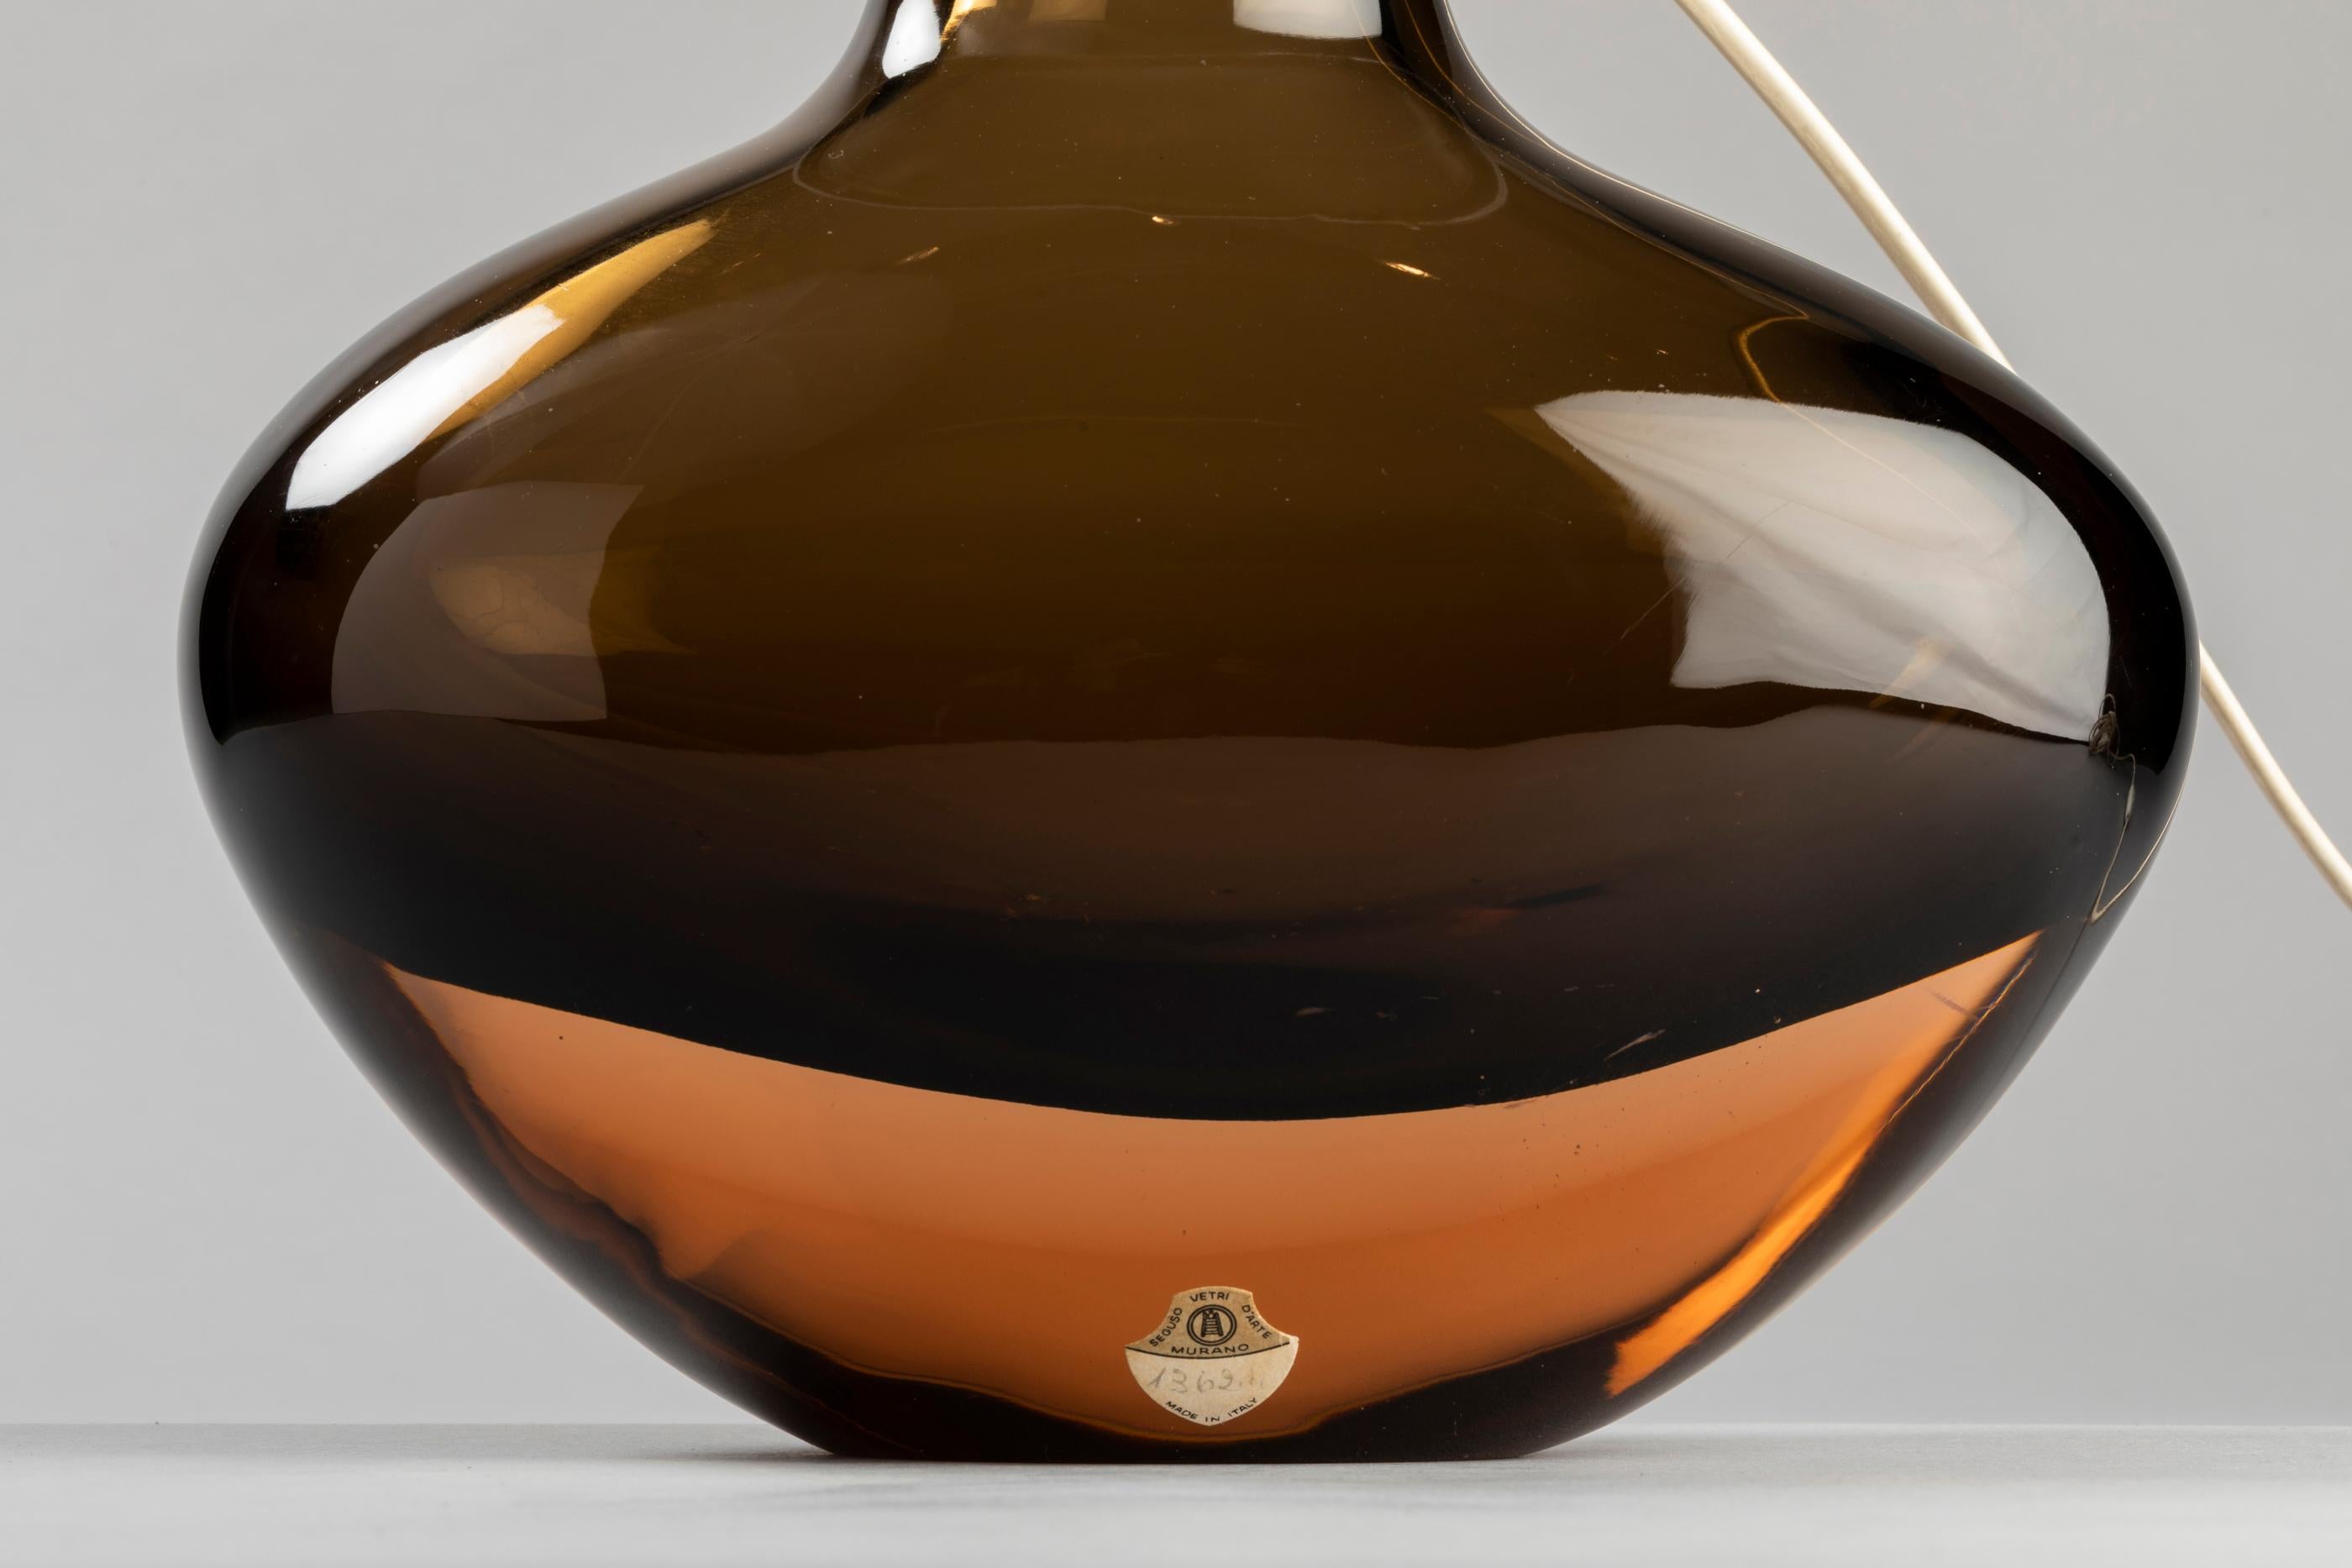 Angelo Seguso gave a new life to this vase that has been redesigned as a table lamp (for Seguso Vetri d'Arte).
A Classic Murano glass work with a brown shade for modernity. A sensual lamp with warm tones to enhance the beauty of your interior.